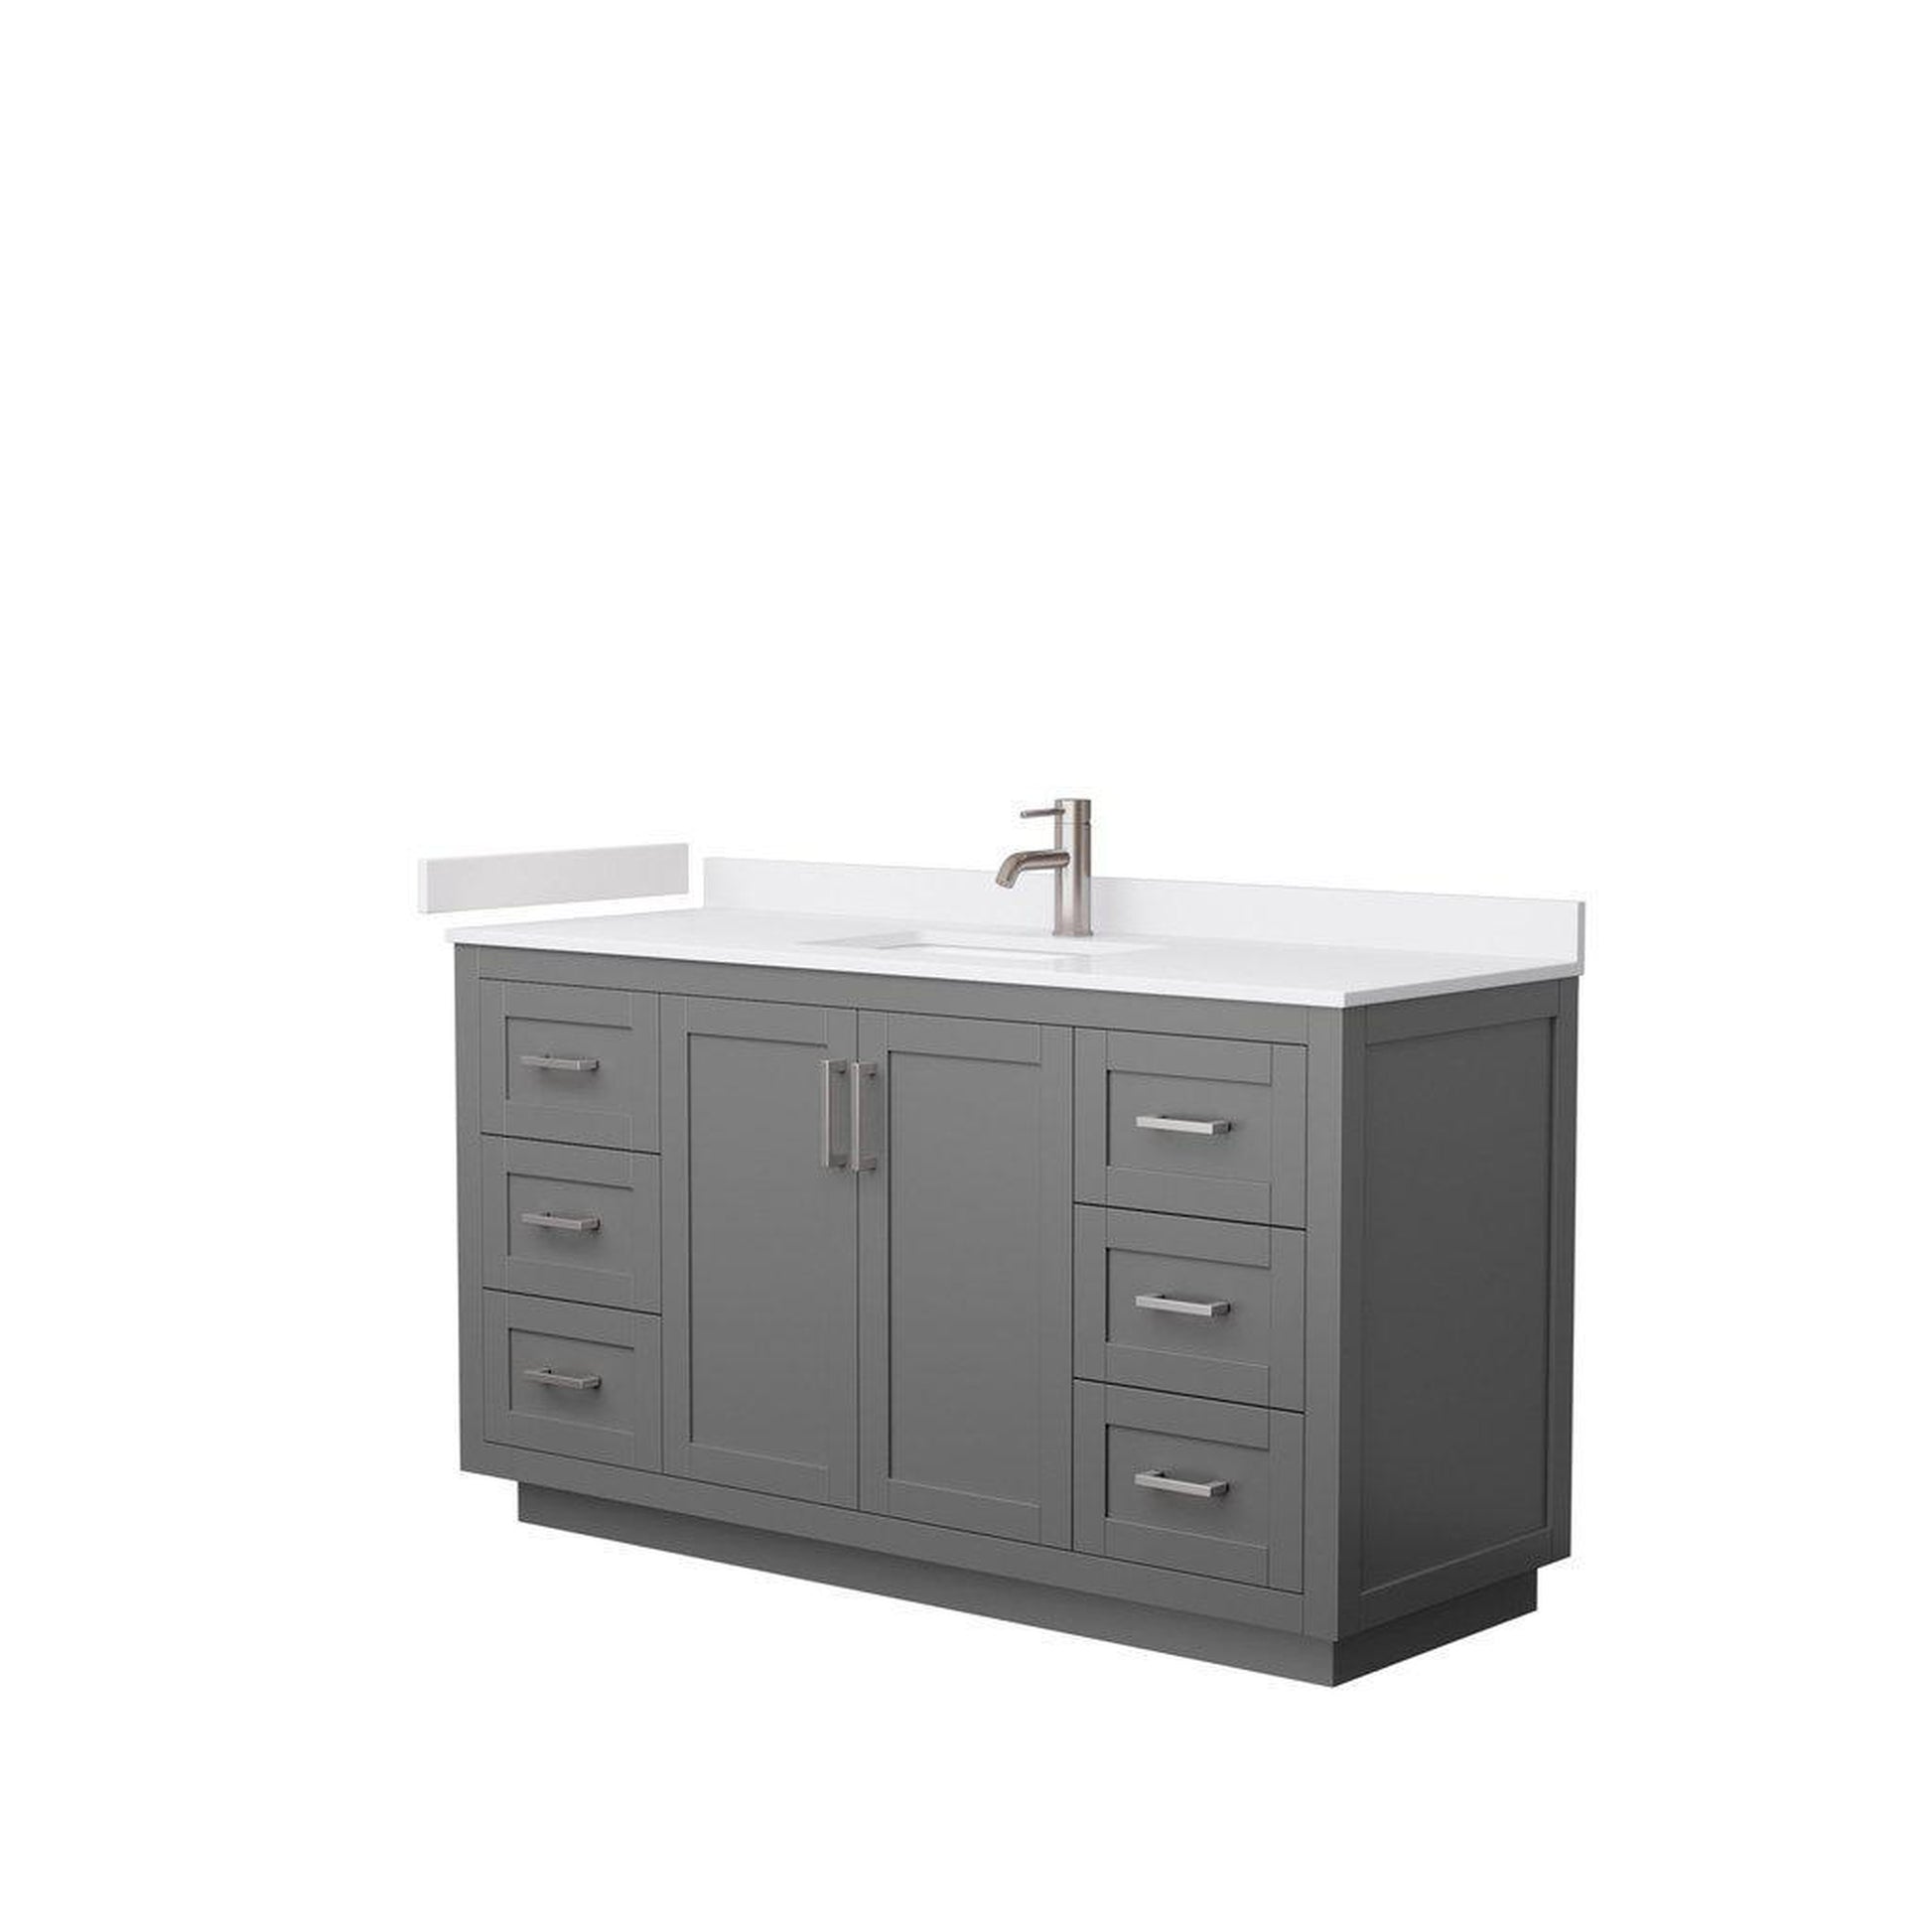 Wyndham Collection Miranda 60" Single Bathroom Dark Gray Vanity Set With White Cultured Marble Countertop, Undermount Square Sink, And Brushed Nickel Trim